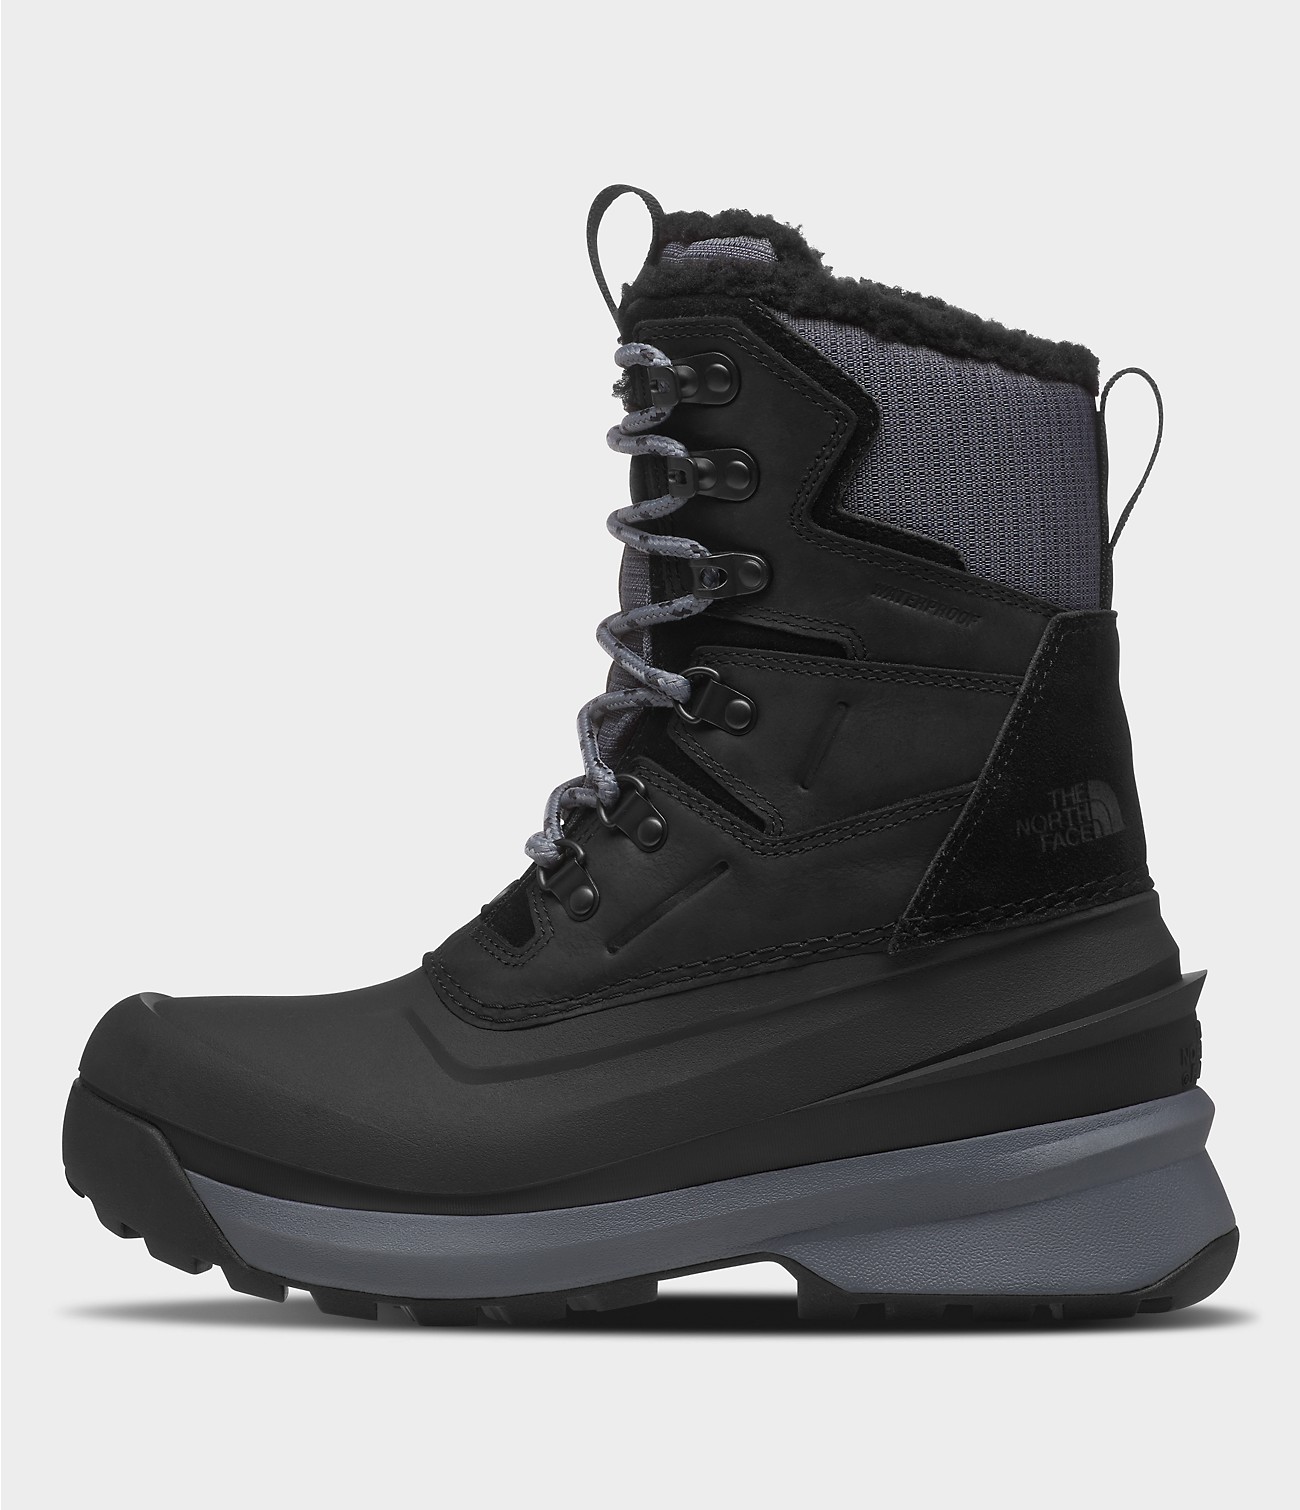 Unlock Wilderness' choice in the Merrell Vs North Face comparison, the Chilkat V 400 Waterproof Boots by The North Face